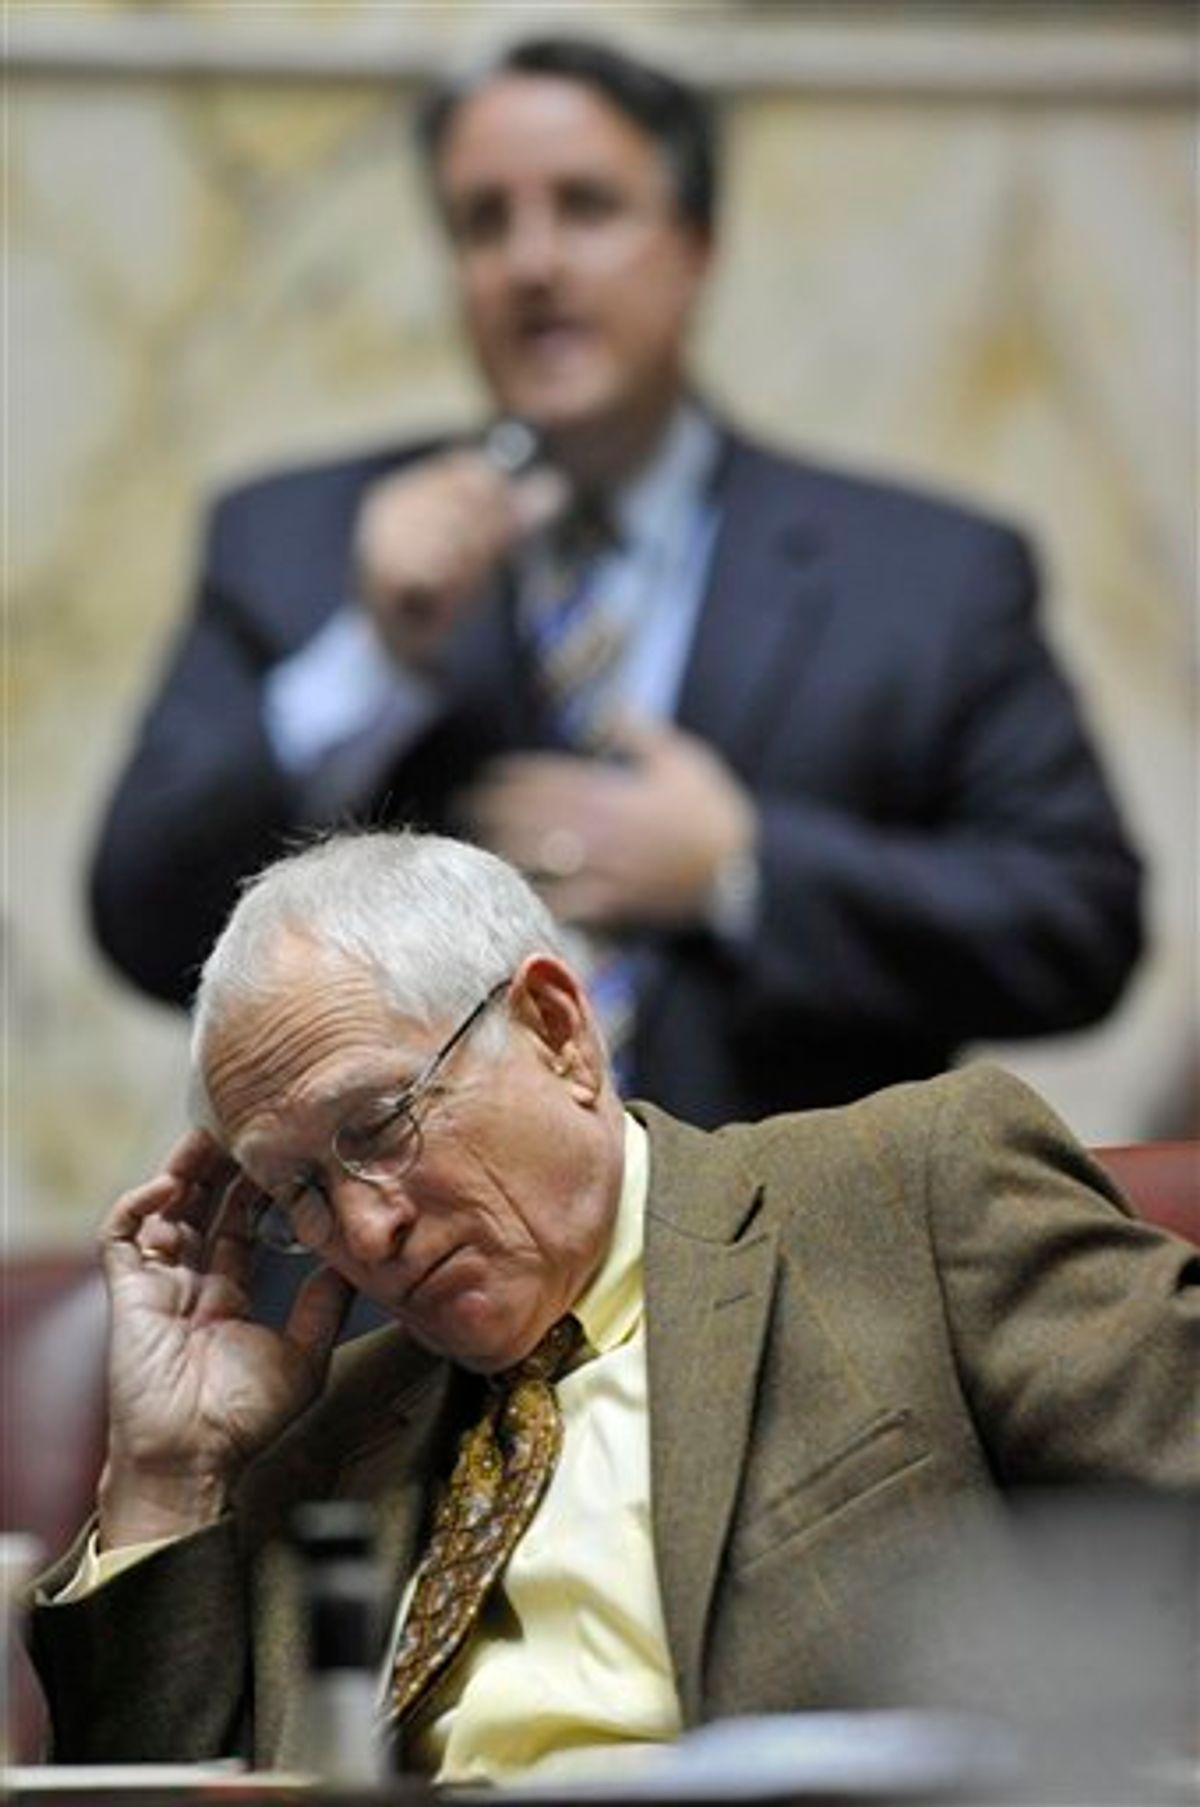 Sen. Richard Madeleno, D-Montgomery County, and the Senate's only openly gay member, speaks behind John Astle, D-Anne Arundel Co., in support of  the gay marriage bill on the State Senate floor Thursday, Feb. 24, 2011 in Annapolis, Md. (AP Photo/Gail Burton)  (AP)